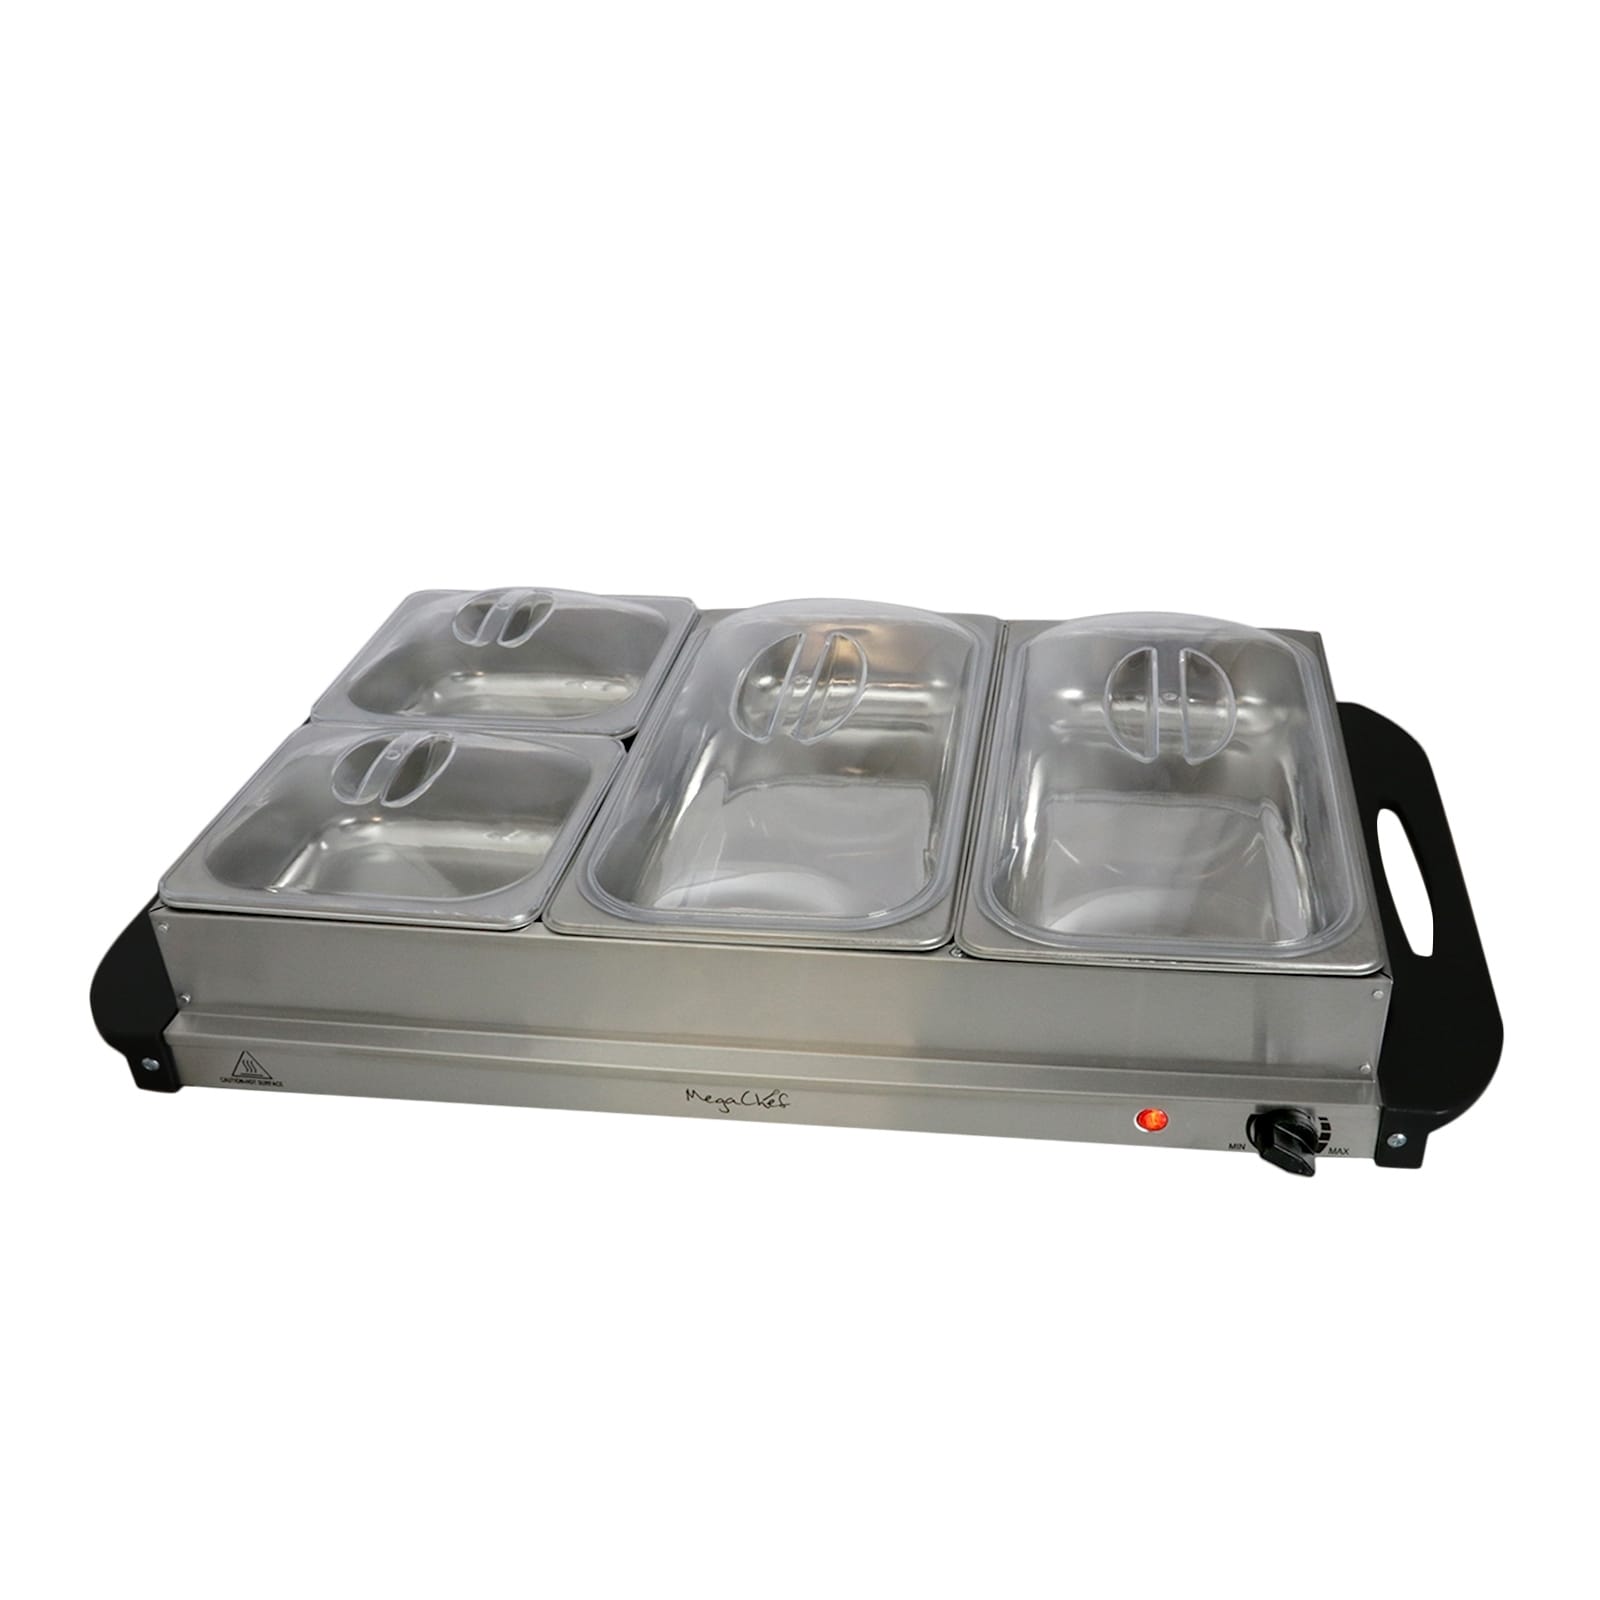 https://ak1.ostkcdn.com/images/products/is/images/direct/c7179c36725e7e8d67ef18fc1af28605ce78b41c/MegaChef-Buffet-Server-%26-Food-Warmer-Tray-Holder-with-Three-Sections.jpg